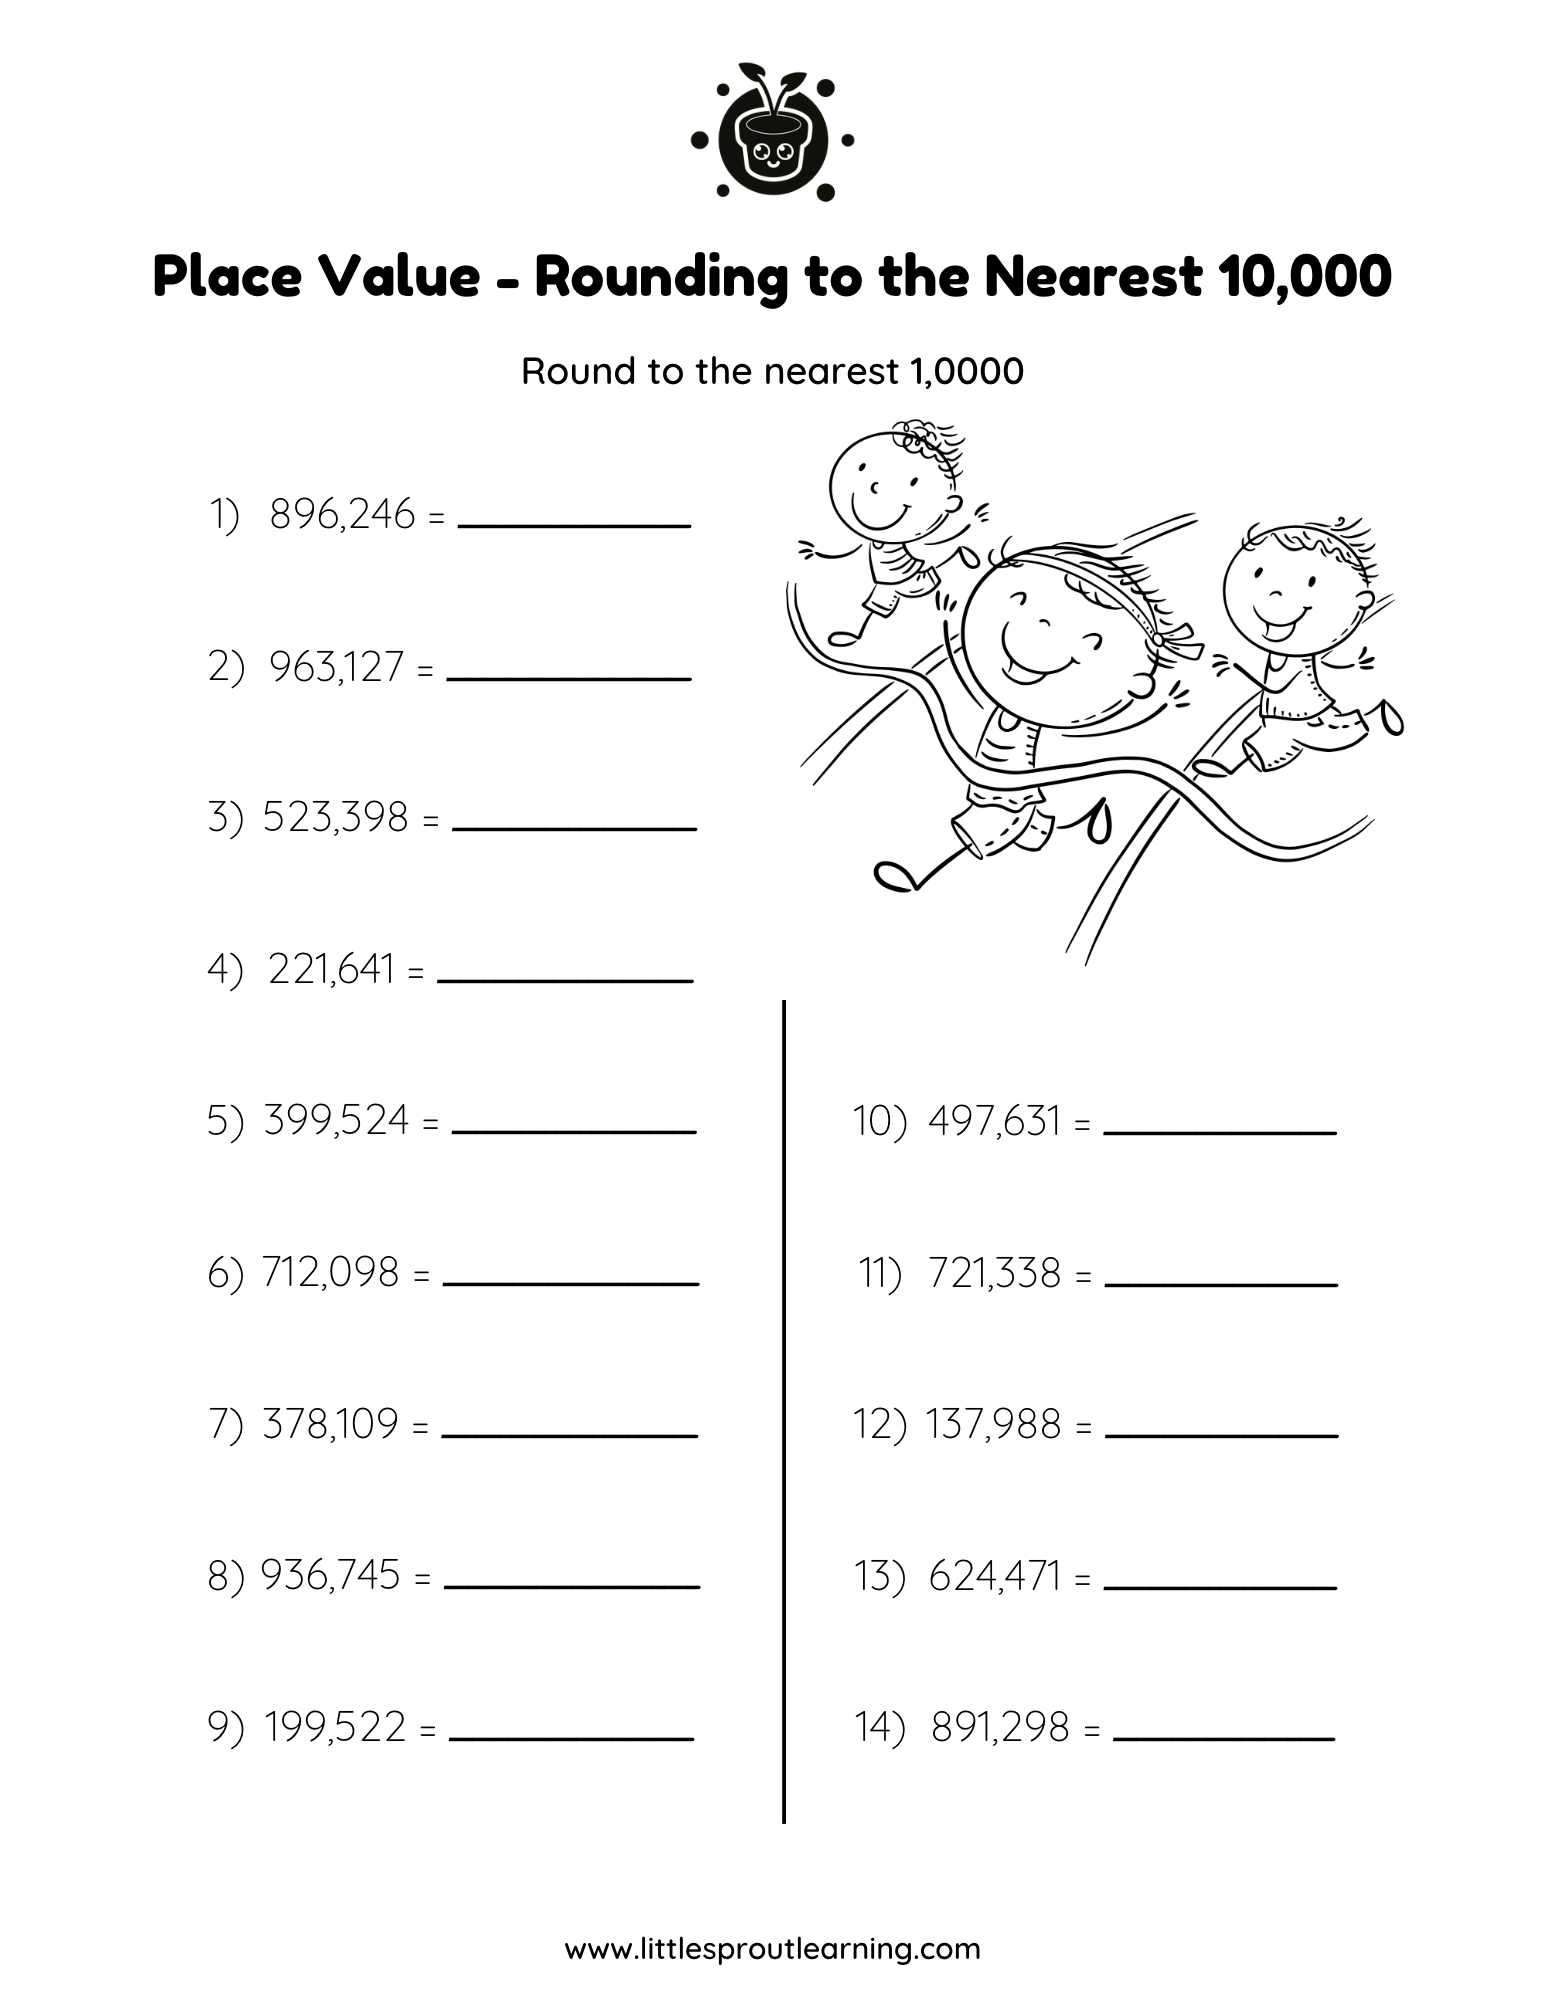 Place Values Worksheet – Rounding to the Nearest 10,000